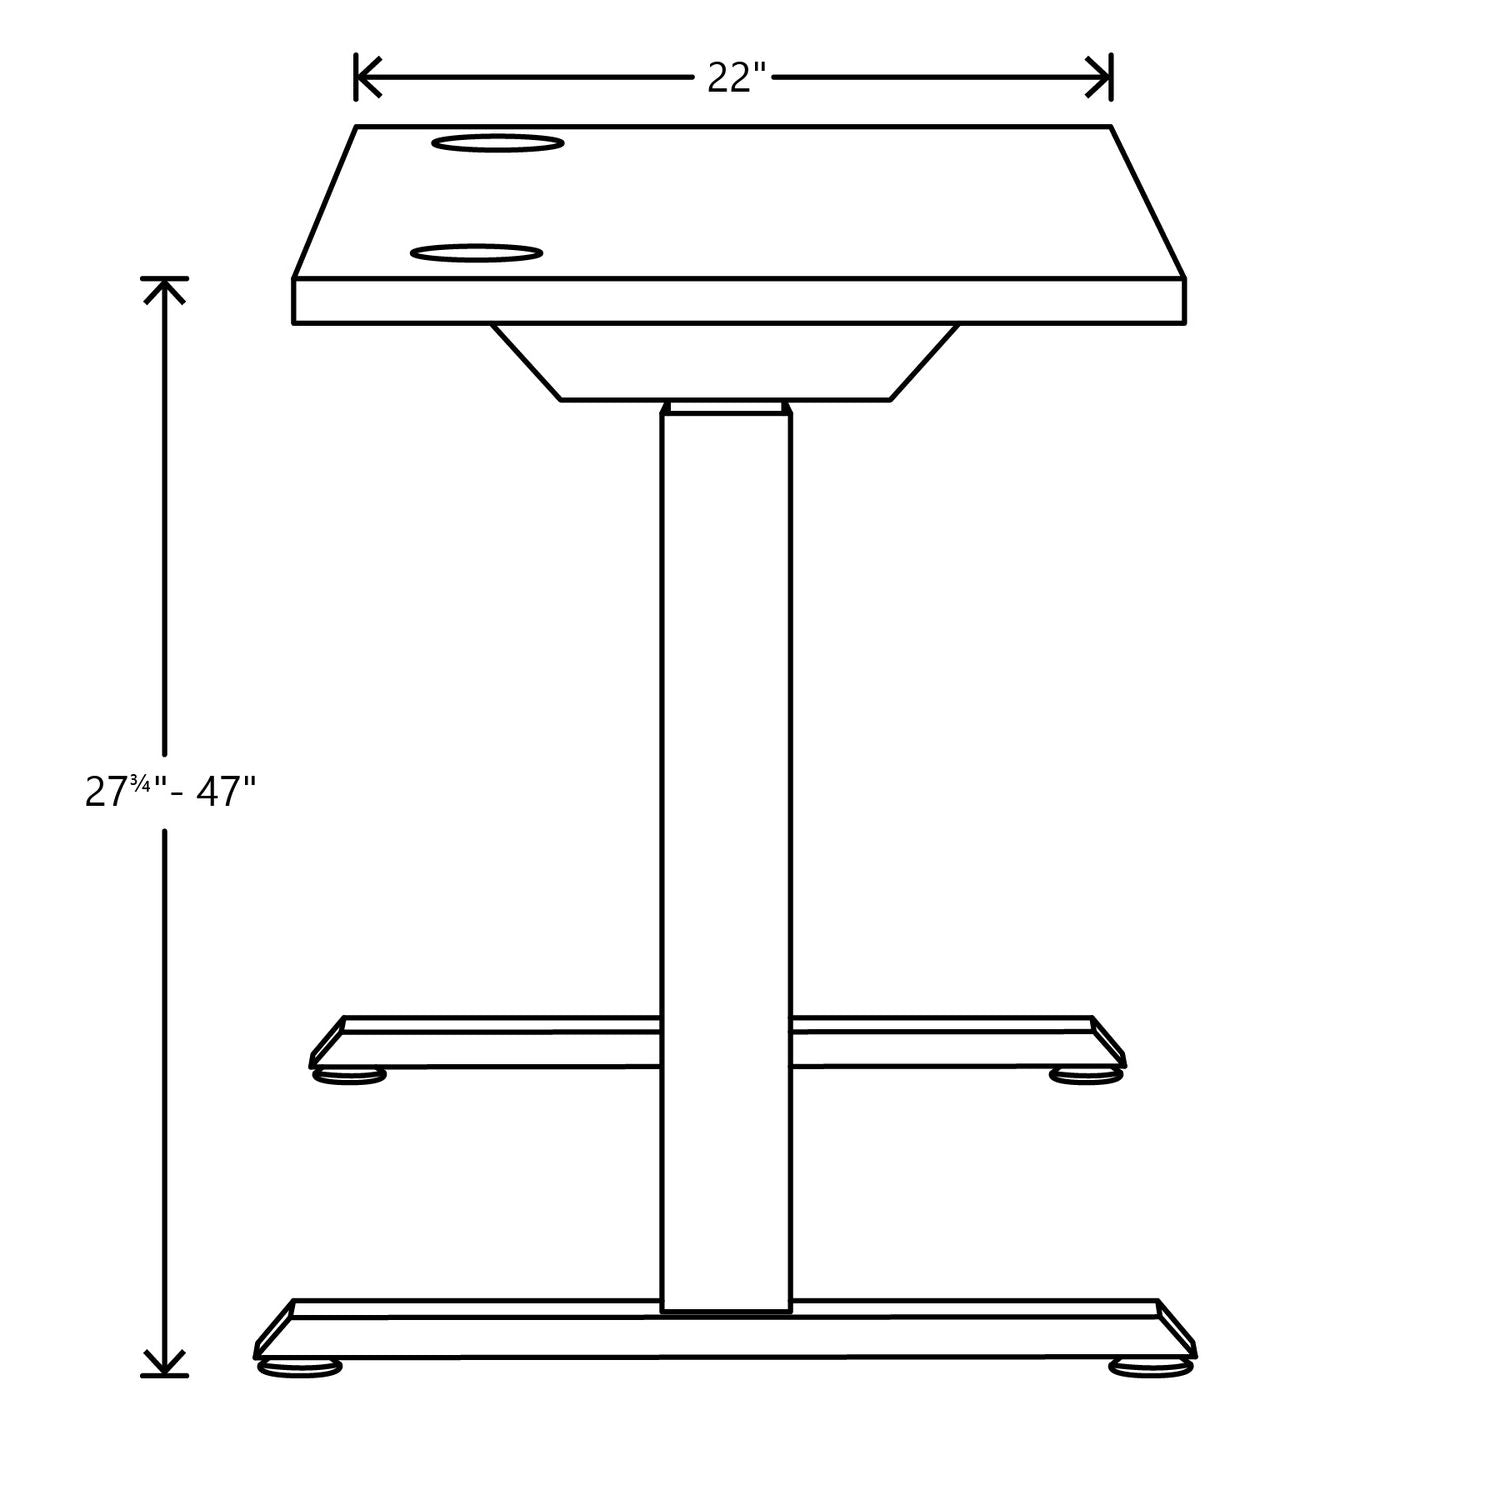 coordinate-height-adjustable-desk-bundle-2-stage-70-x-22-x-2775-to-47-silver-mesh\\silver-ships-in-7-10-business-days_honhat2smsv2270 - 8